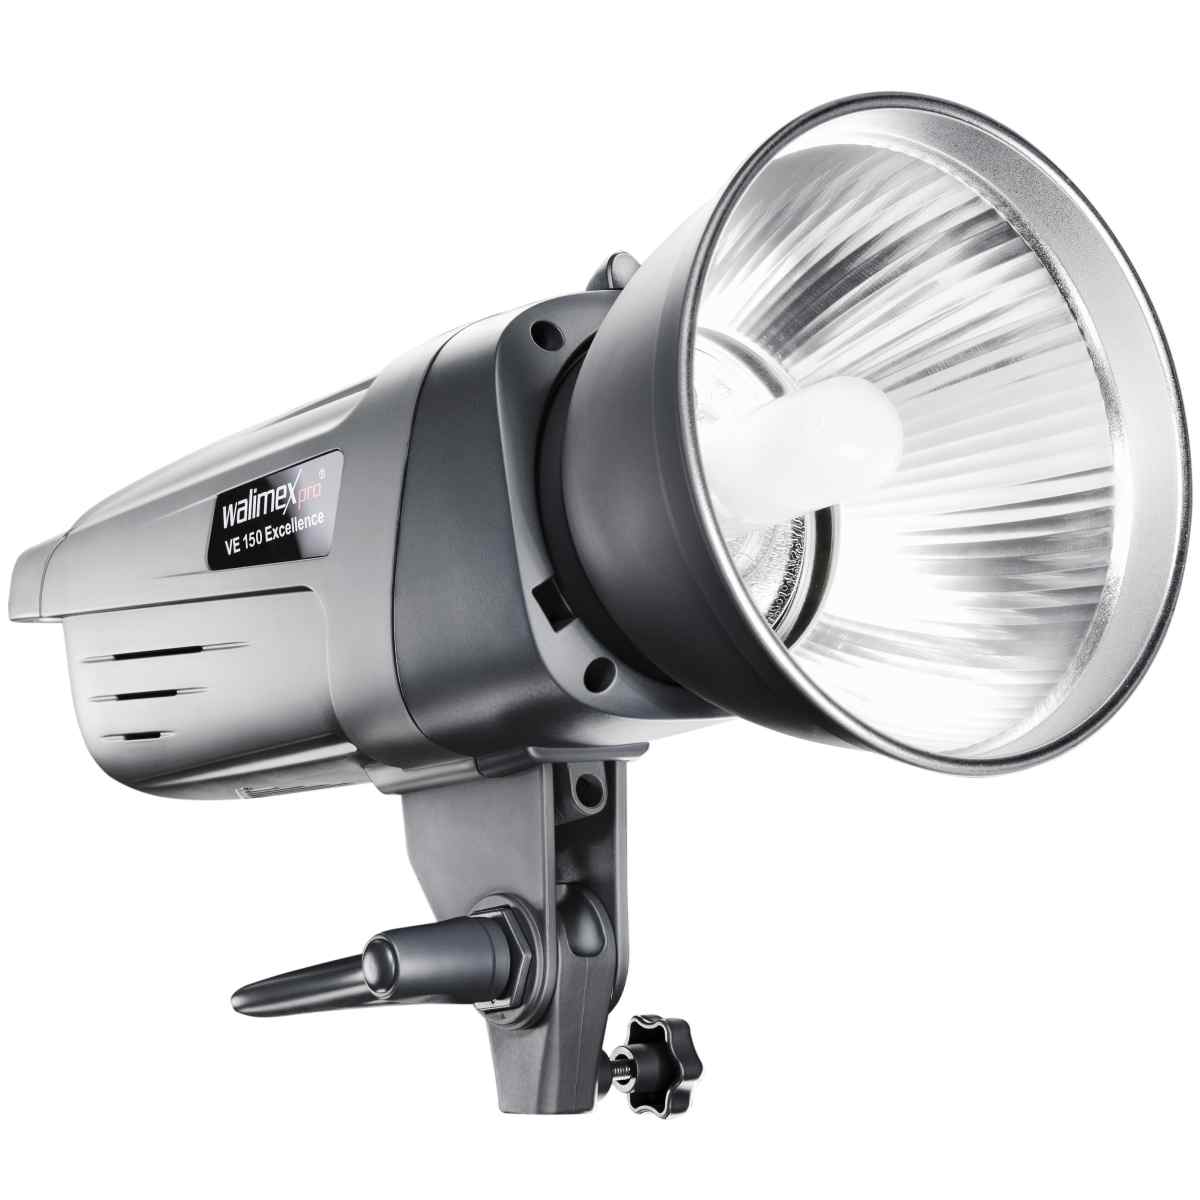 Walimex pro VE-150 Excellence studio flash